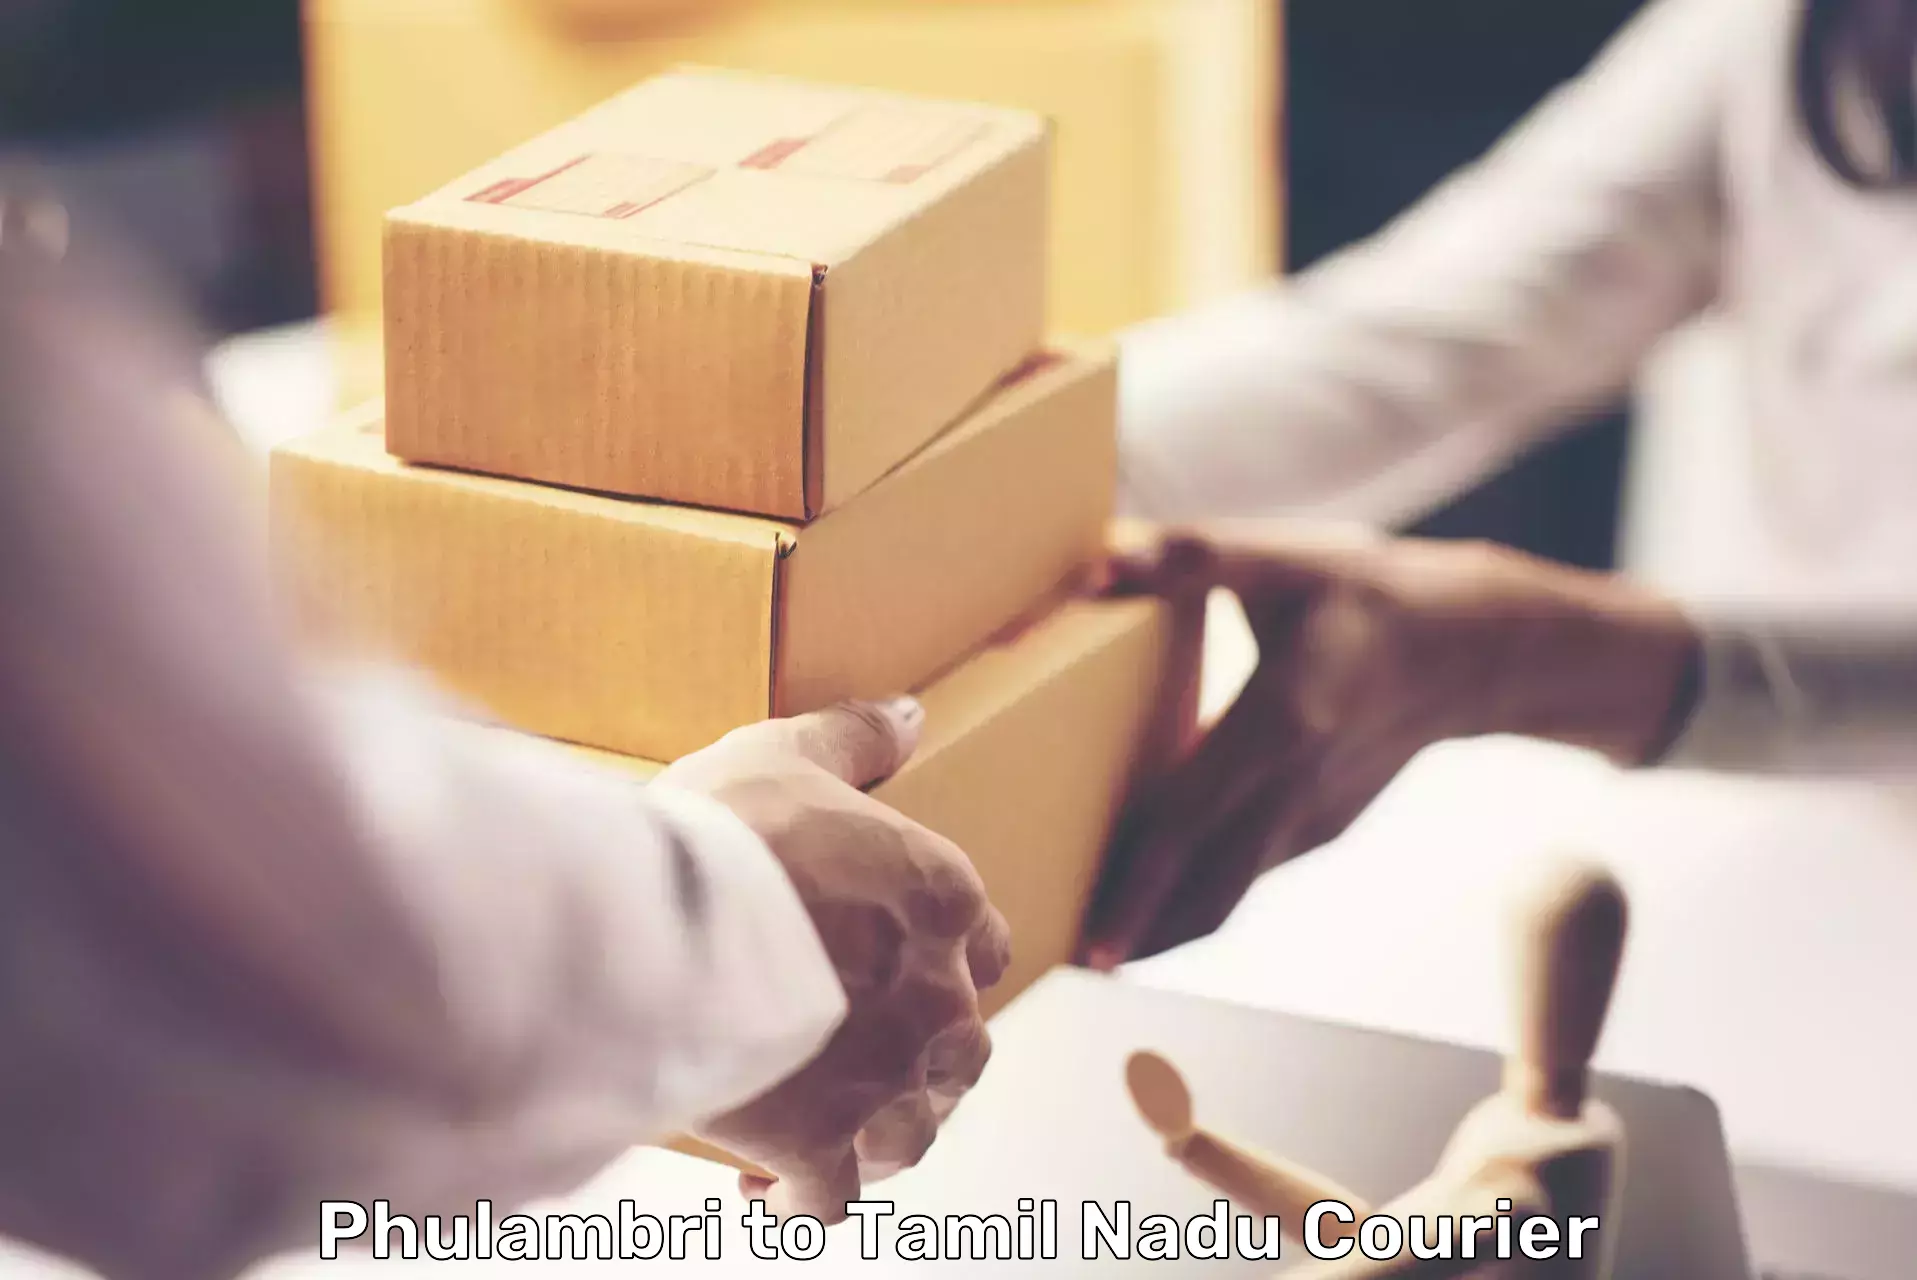 On-call courier service Phulambri to Tamil Nadu